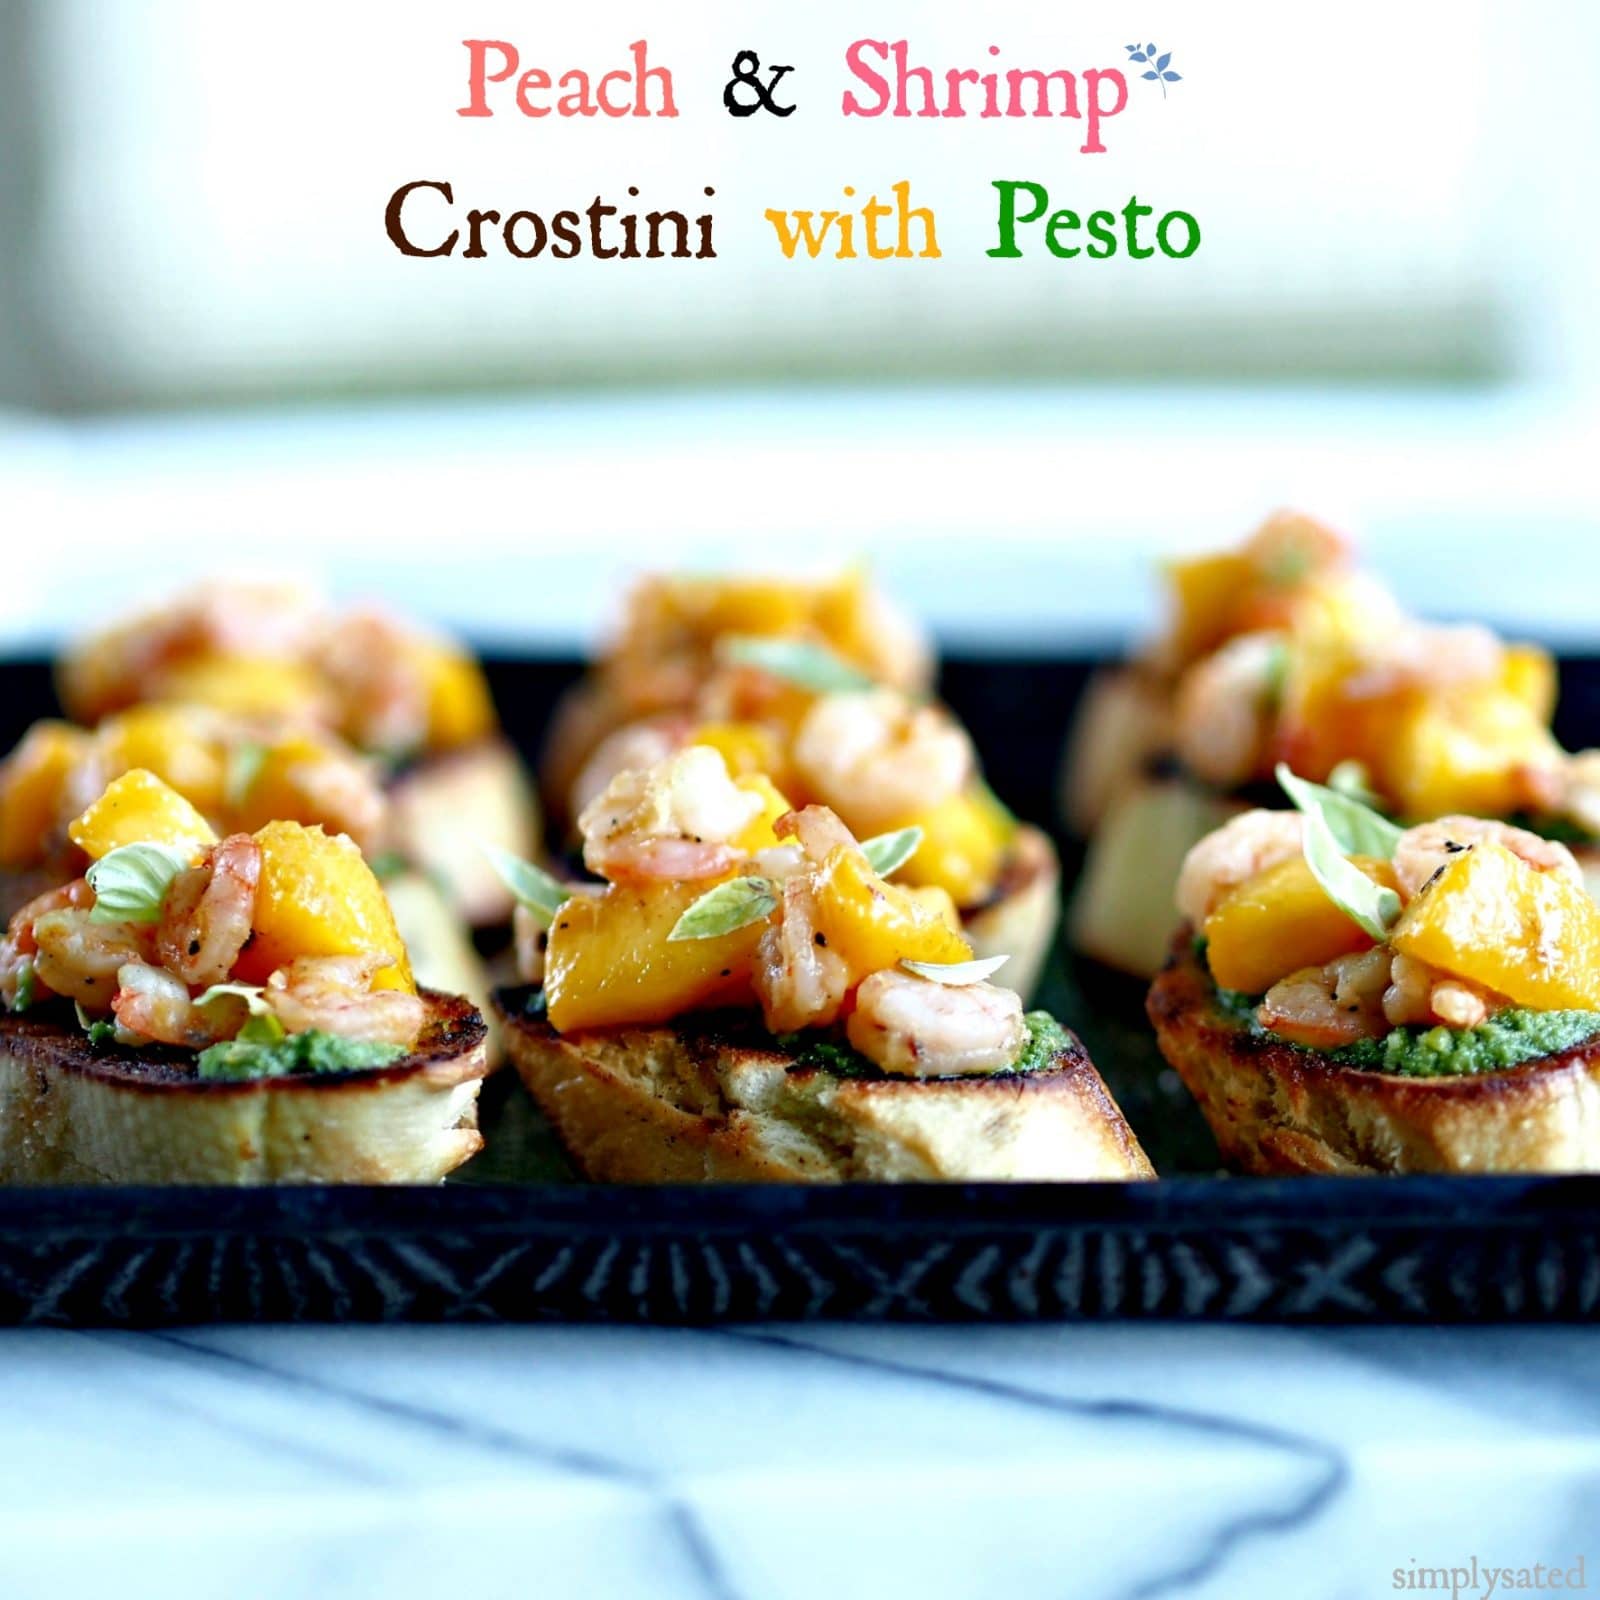 Peach & Shrimp Crostini with Pesto is an easy, elegant appetizer. Perfect for family or friends. www.simplysated.com